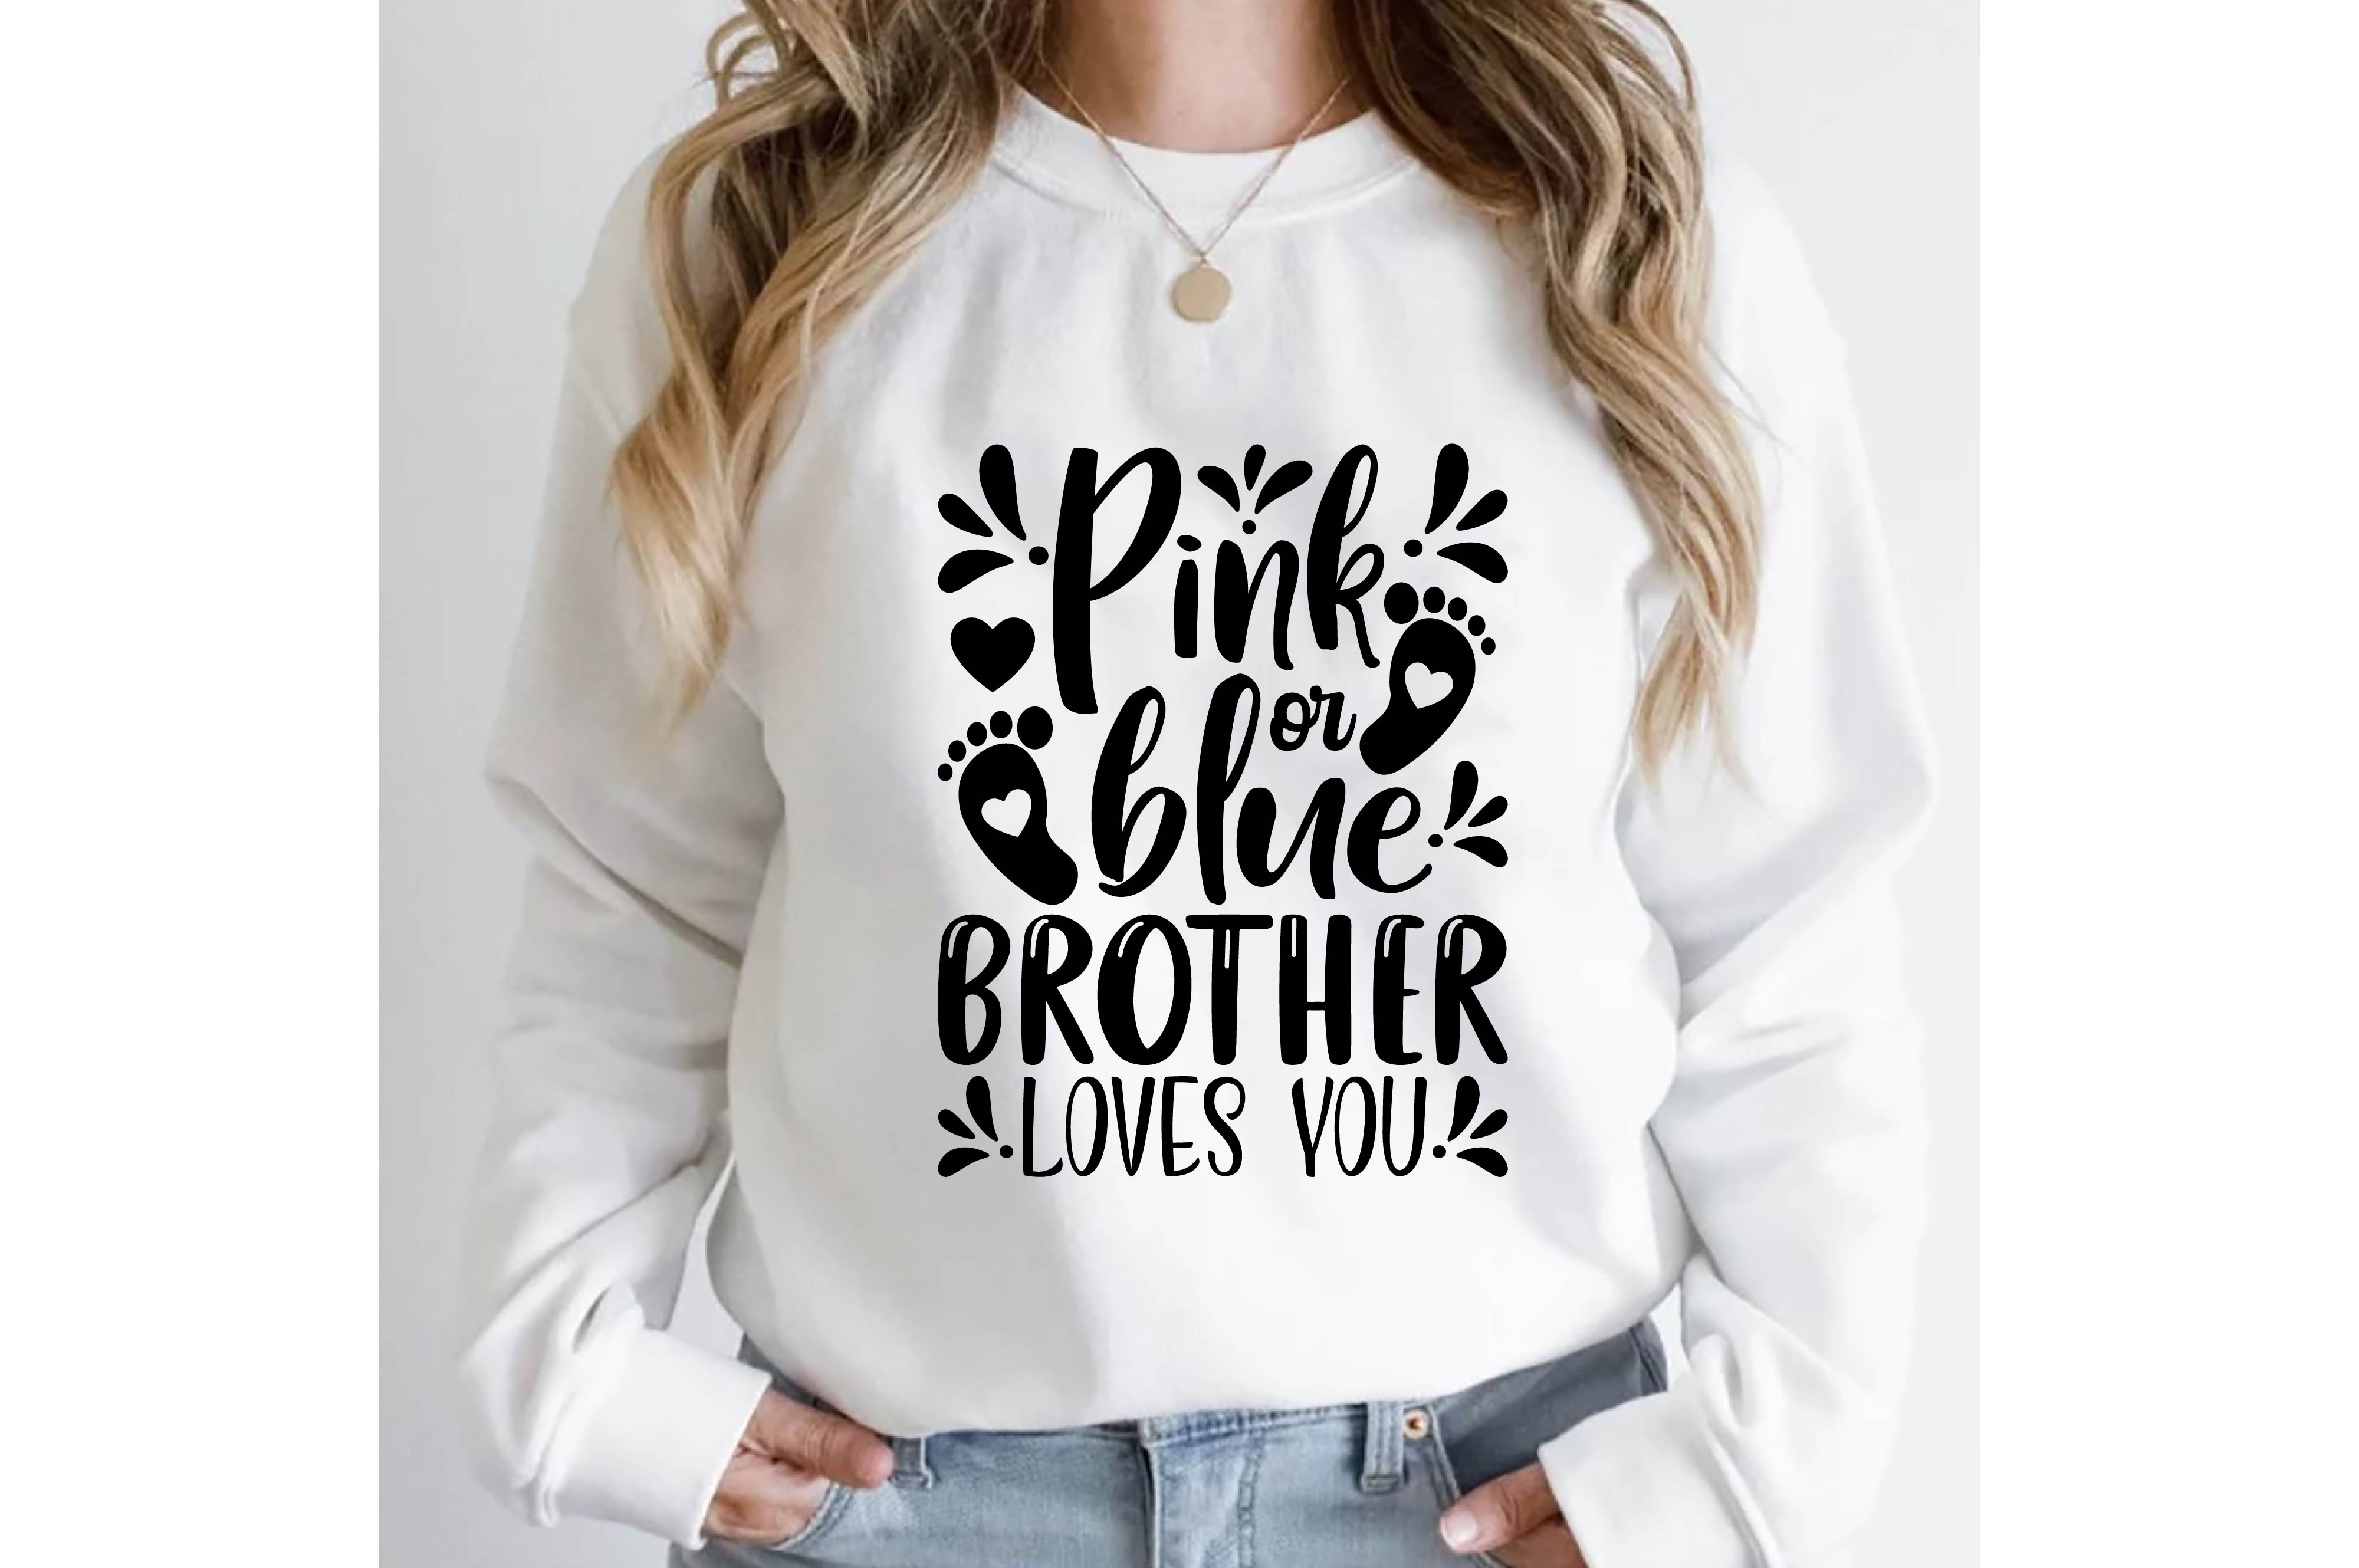 Woman wearing a sweatshirt that says pink or blue brother loves you.